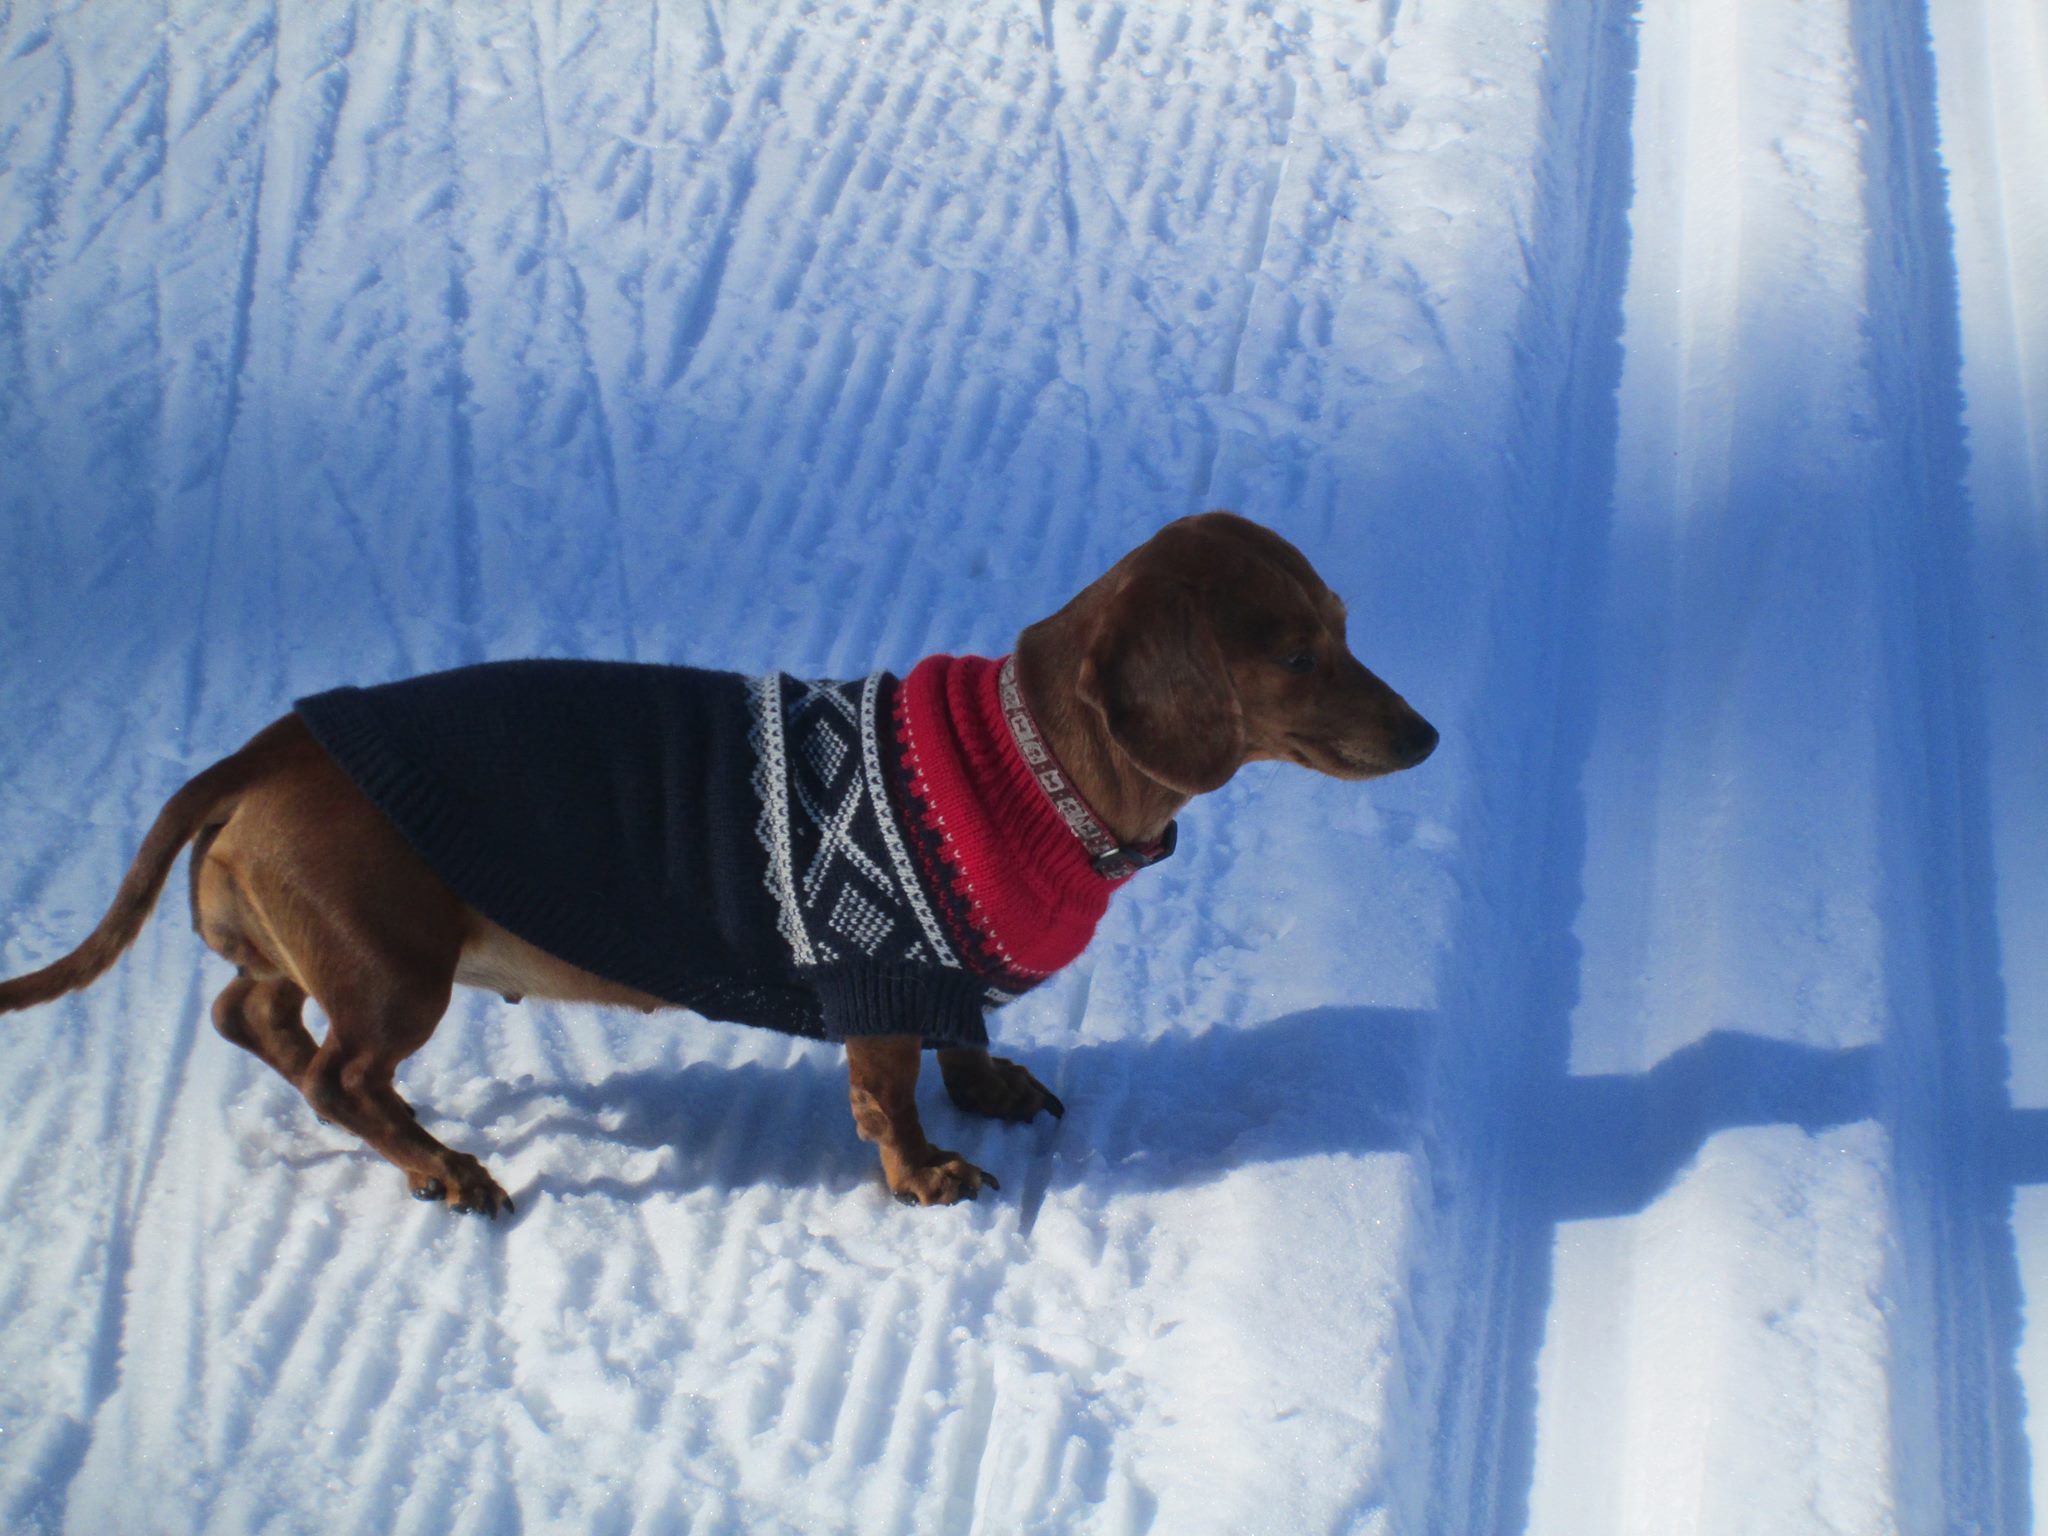 A Dachshund standing in snow